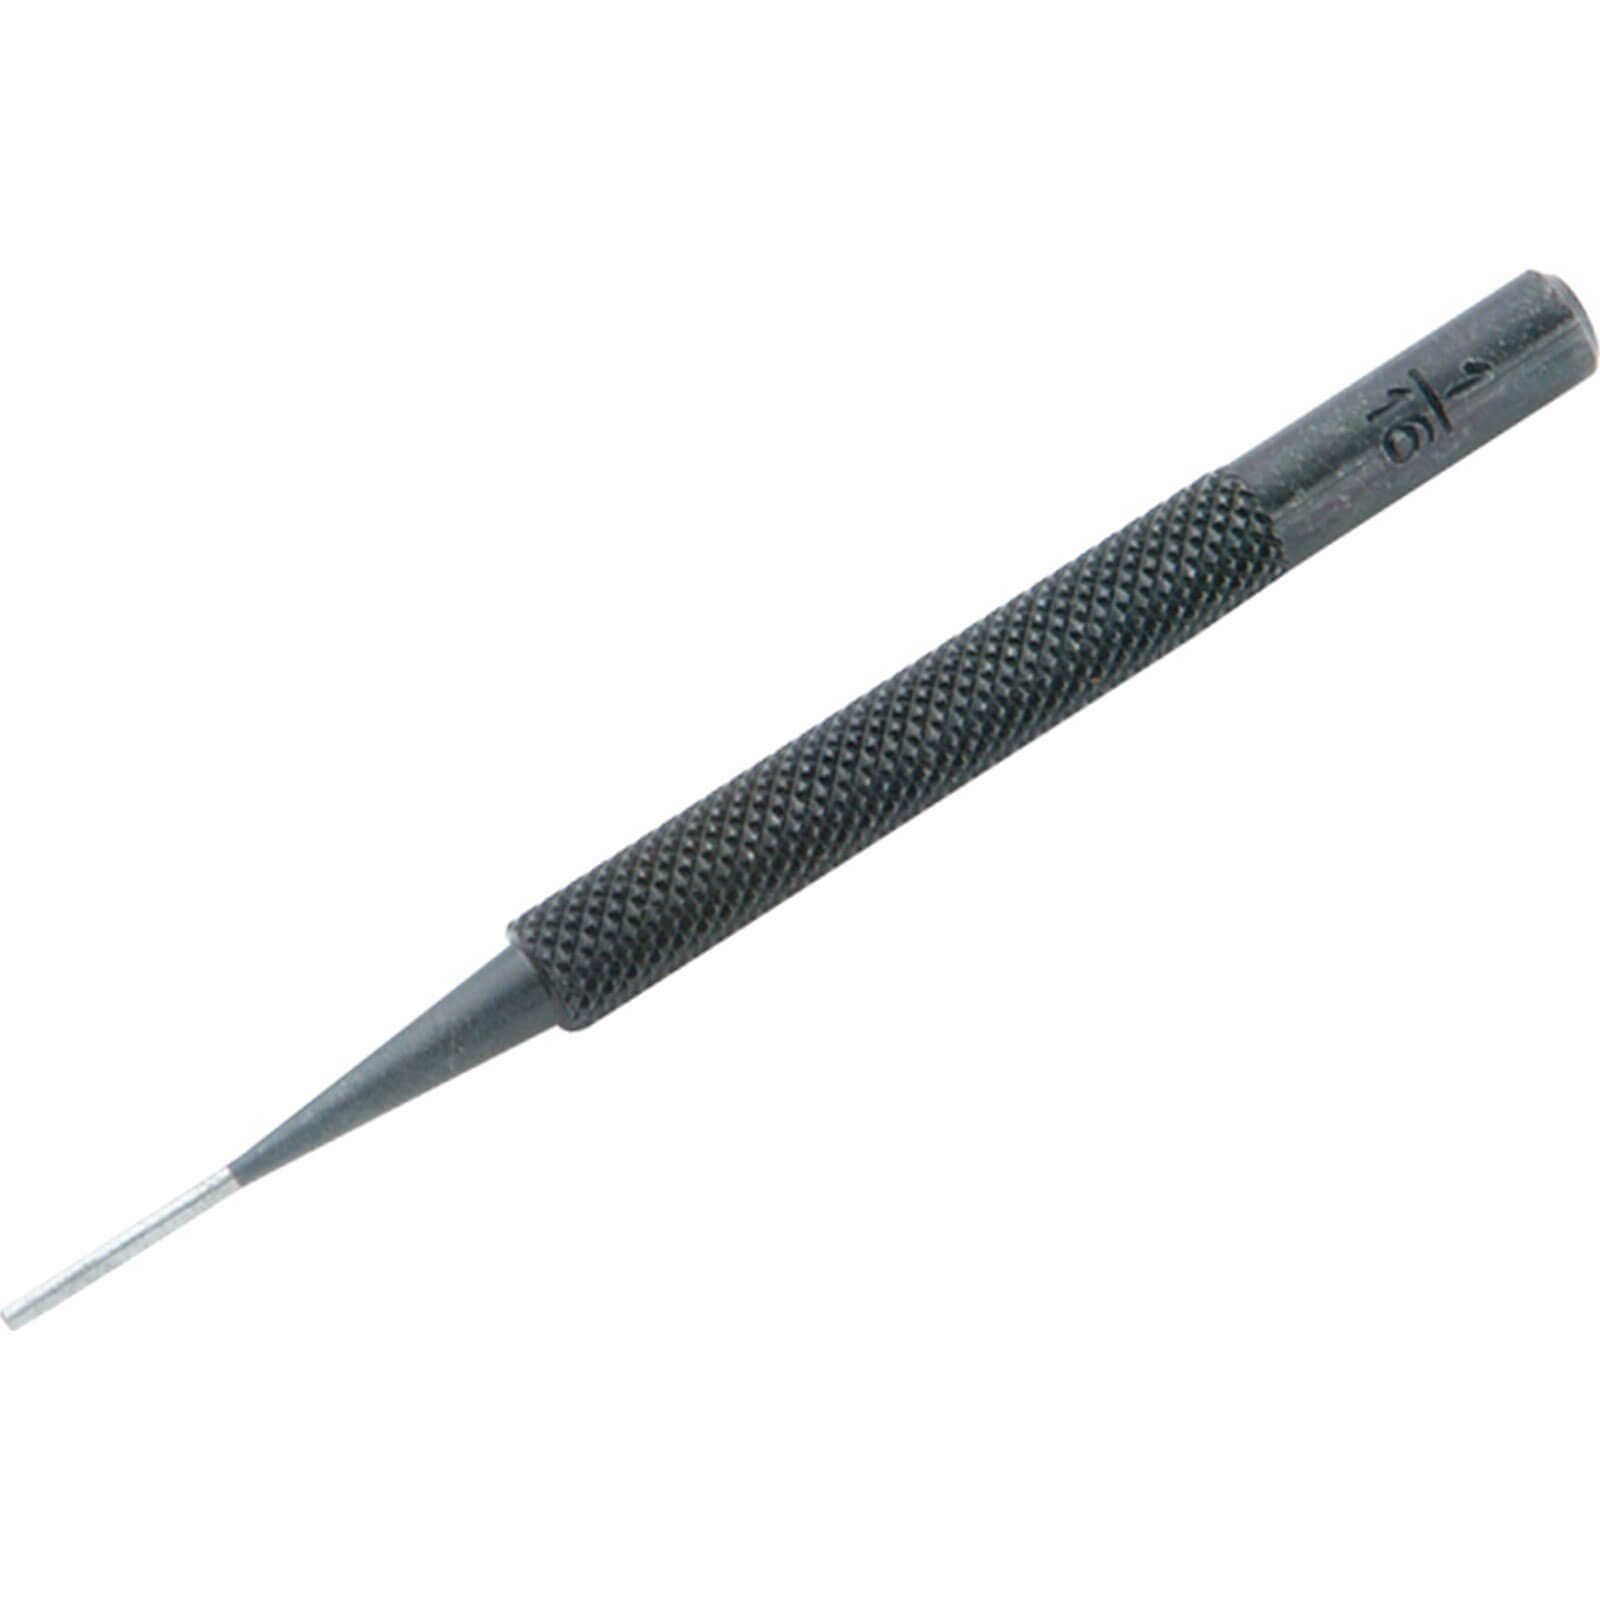 Image of Priory Parrallel Pin Punch 7/32"